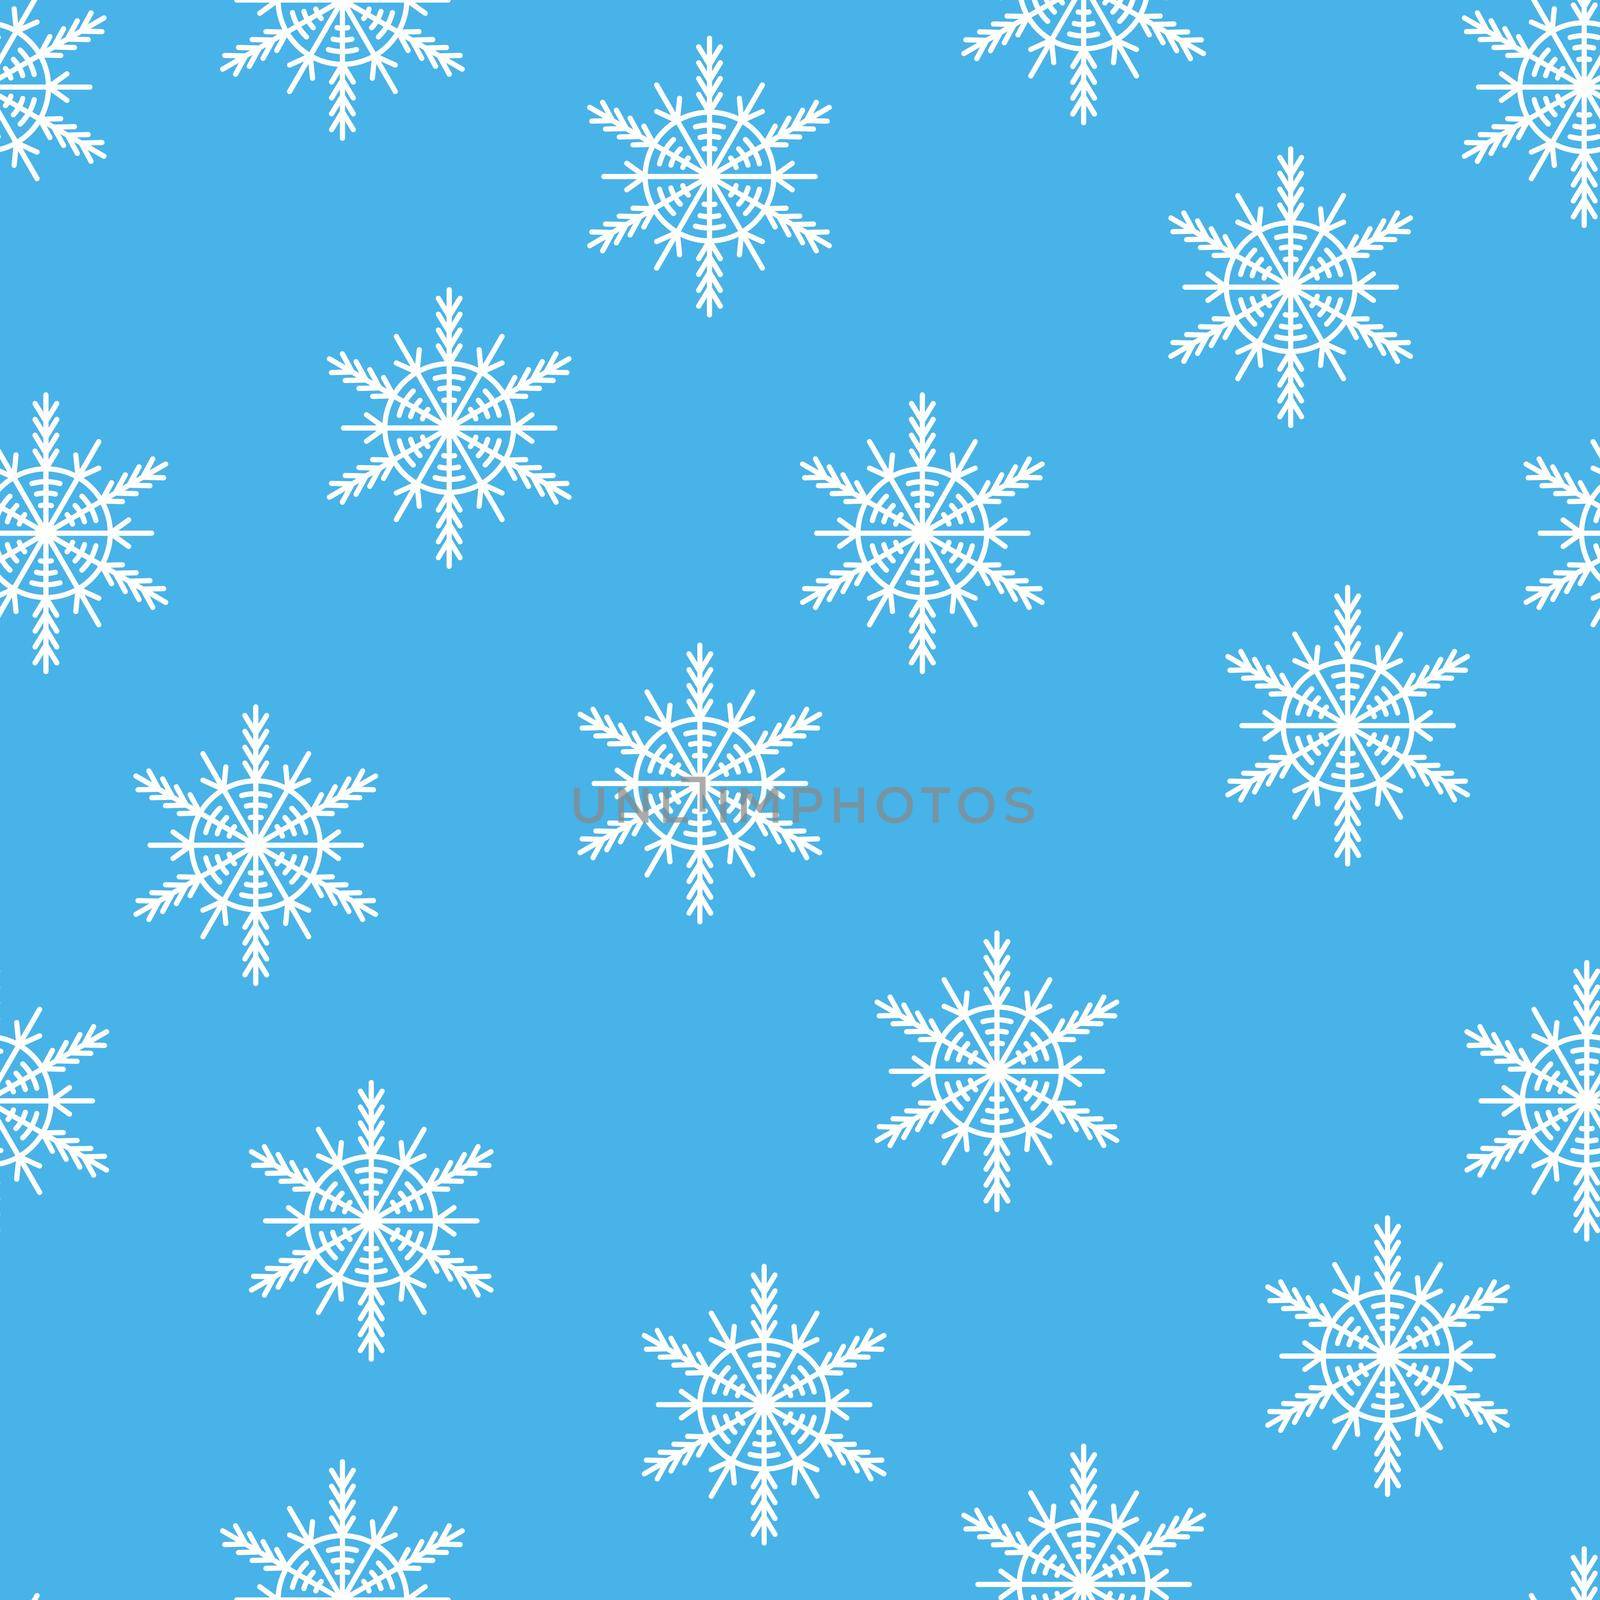 Winter seamless pattern with white snowflakes on blue background. Vector illustration for fabric, textile wallpaper, posters, gift wrapping paper. Christmas vector illustration. by allaku